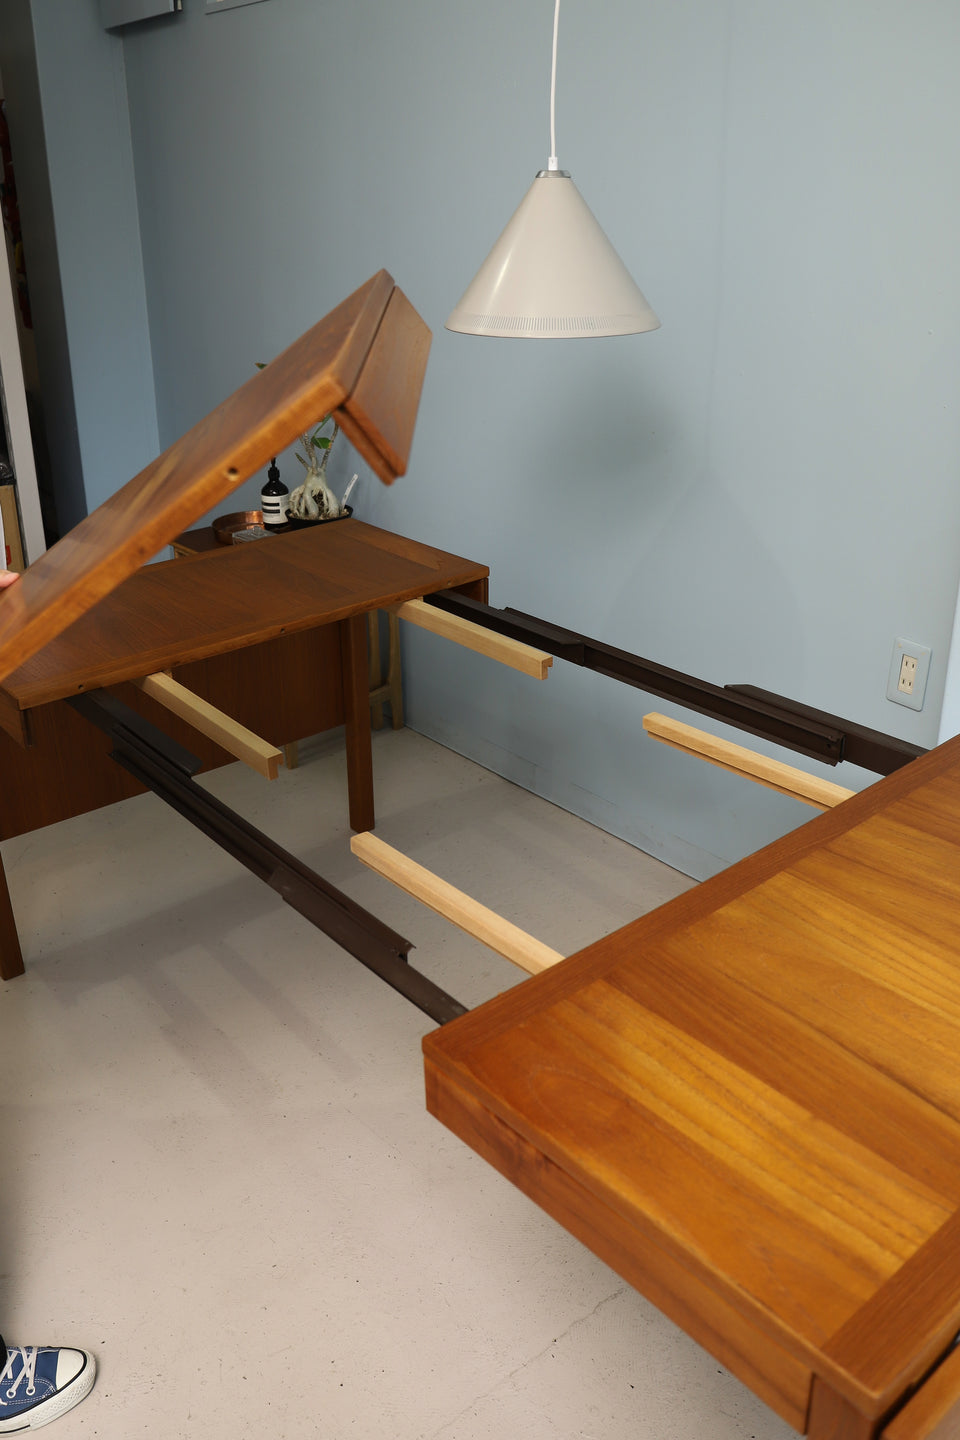 Vejle Stole & Møbelfabrik Extension Dining Table Danish Vintage/デンマークヴィンテージ エクステンション ダイニングテーブル 北欧家具